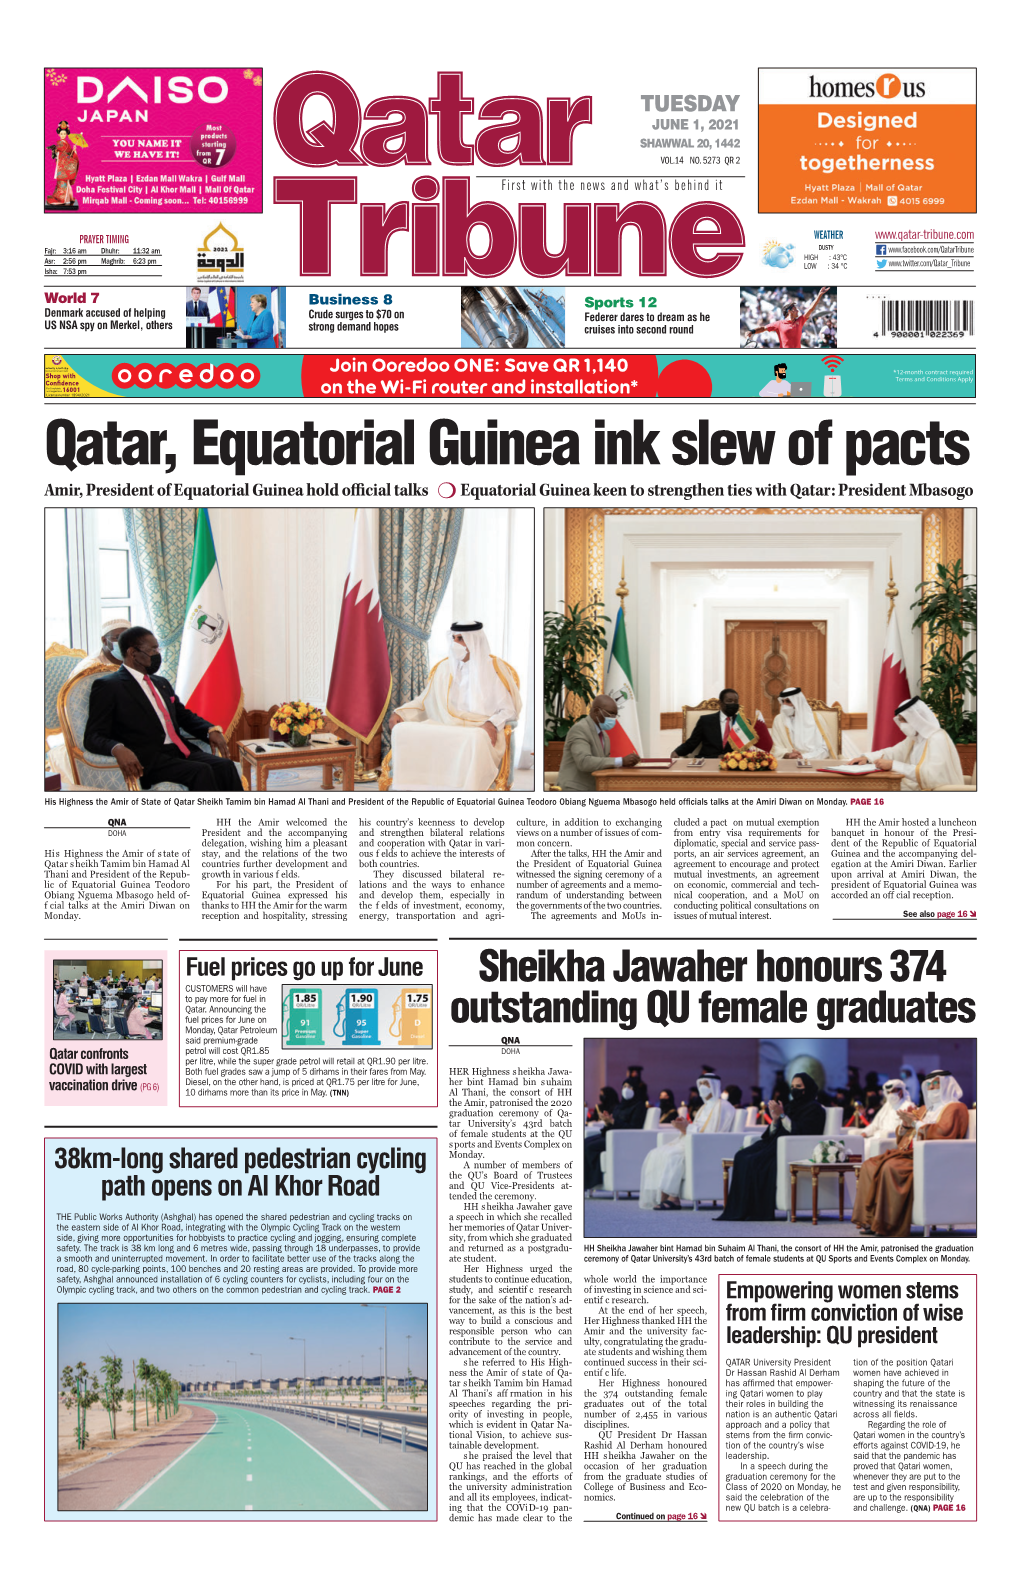 Qatar, Equatorial Guinea Ink Slew of Pacts